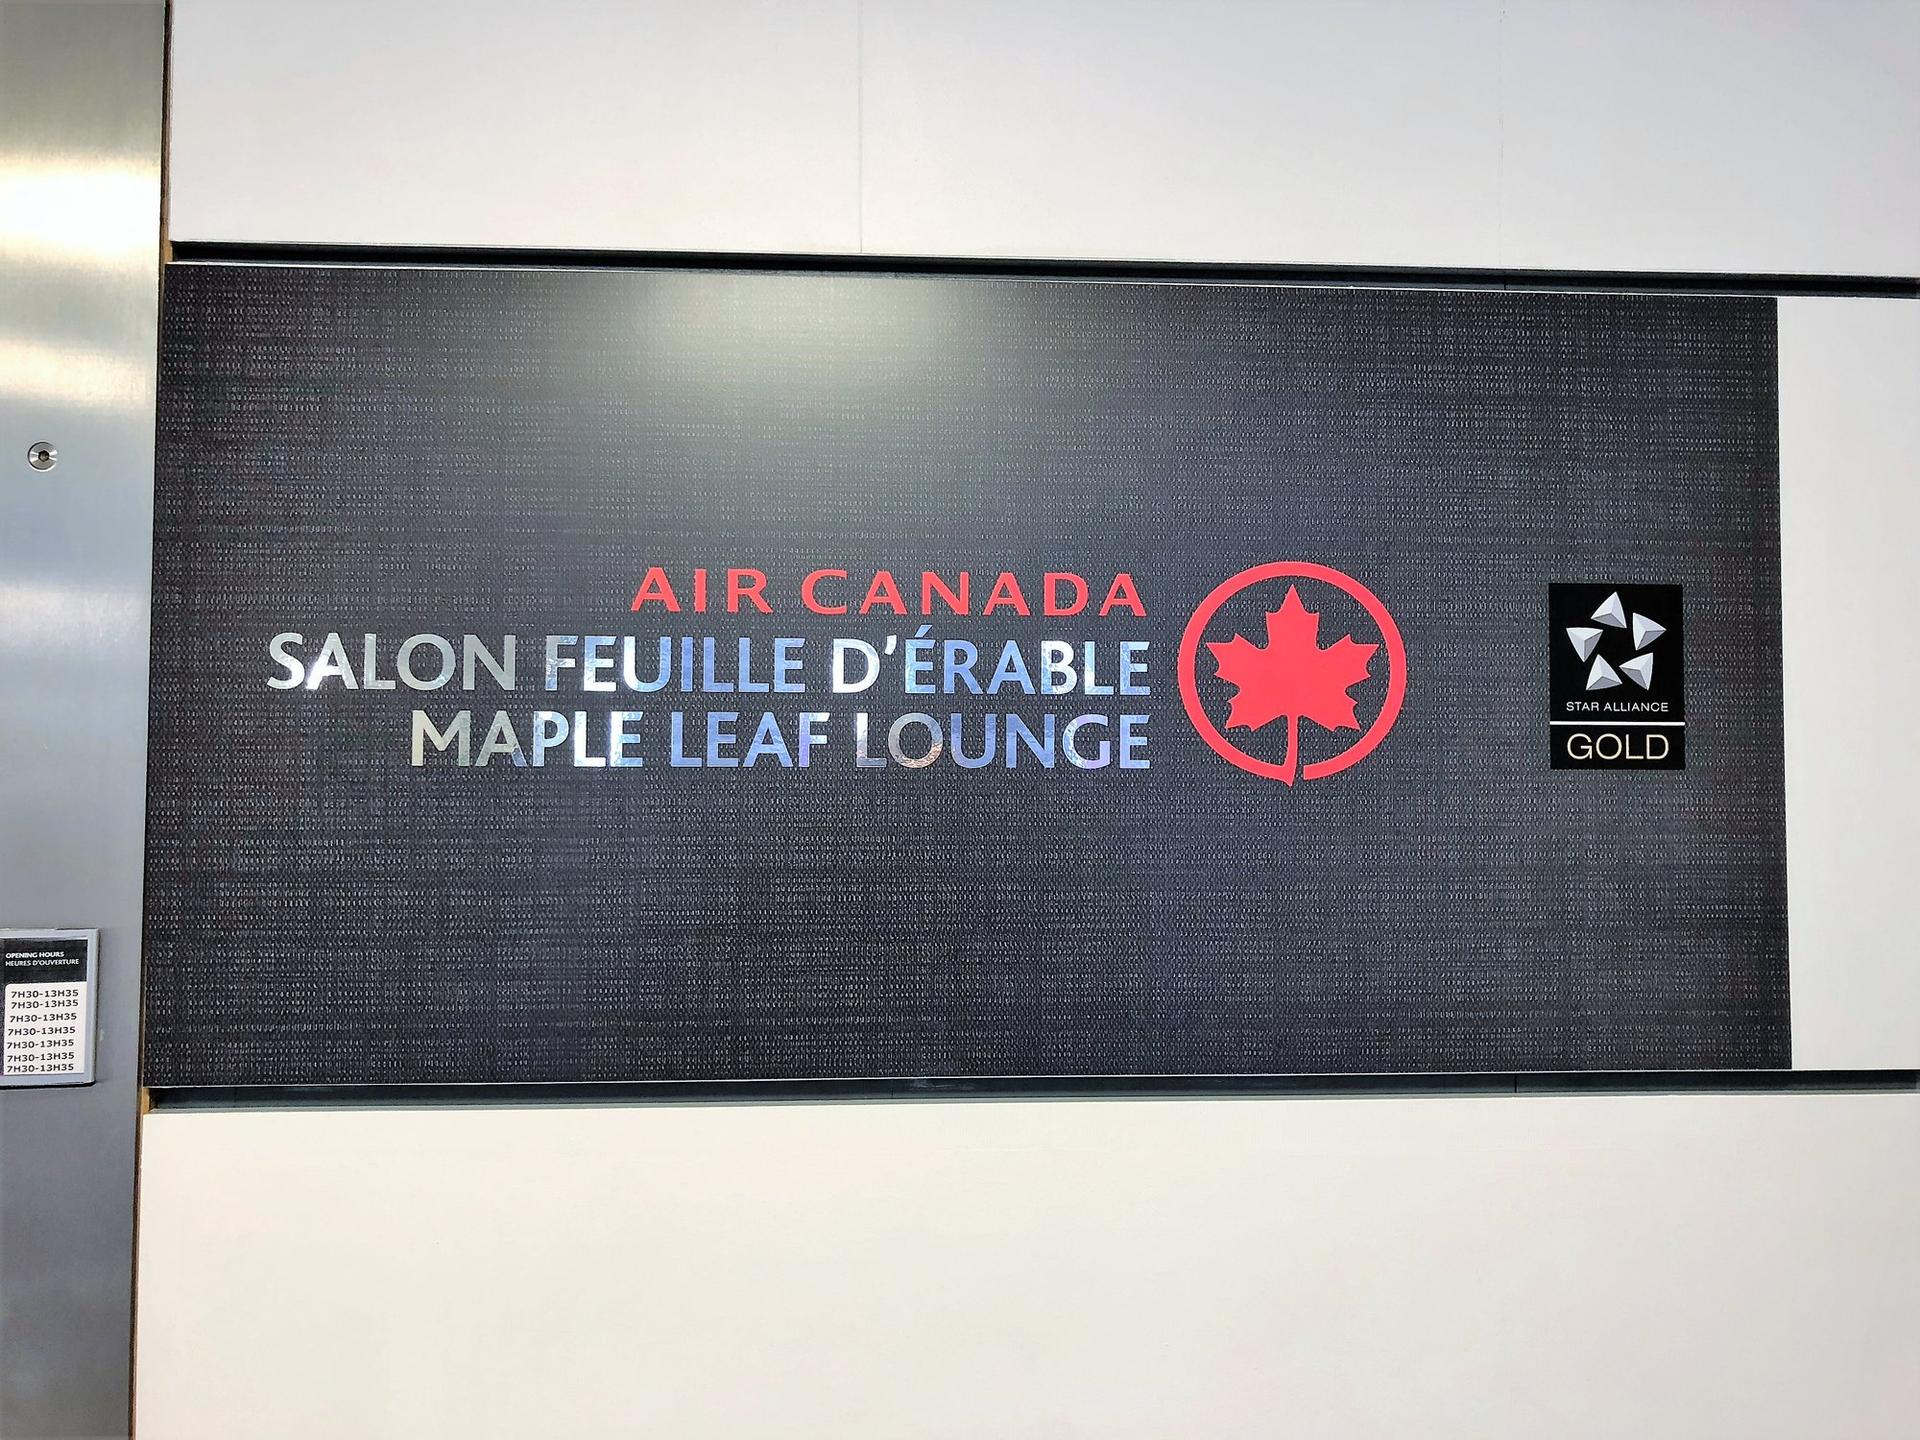 Air Canada Maple Leaf Lounge image 49 of 64